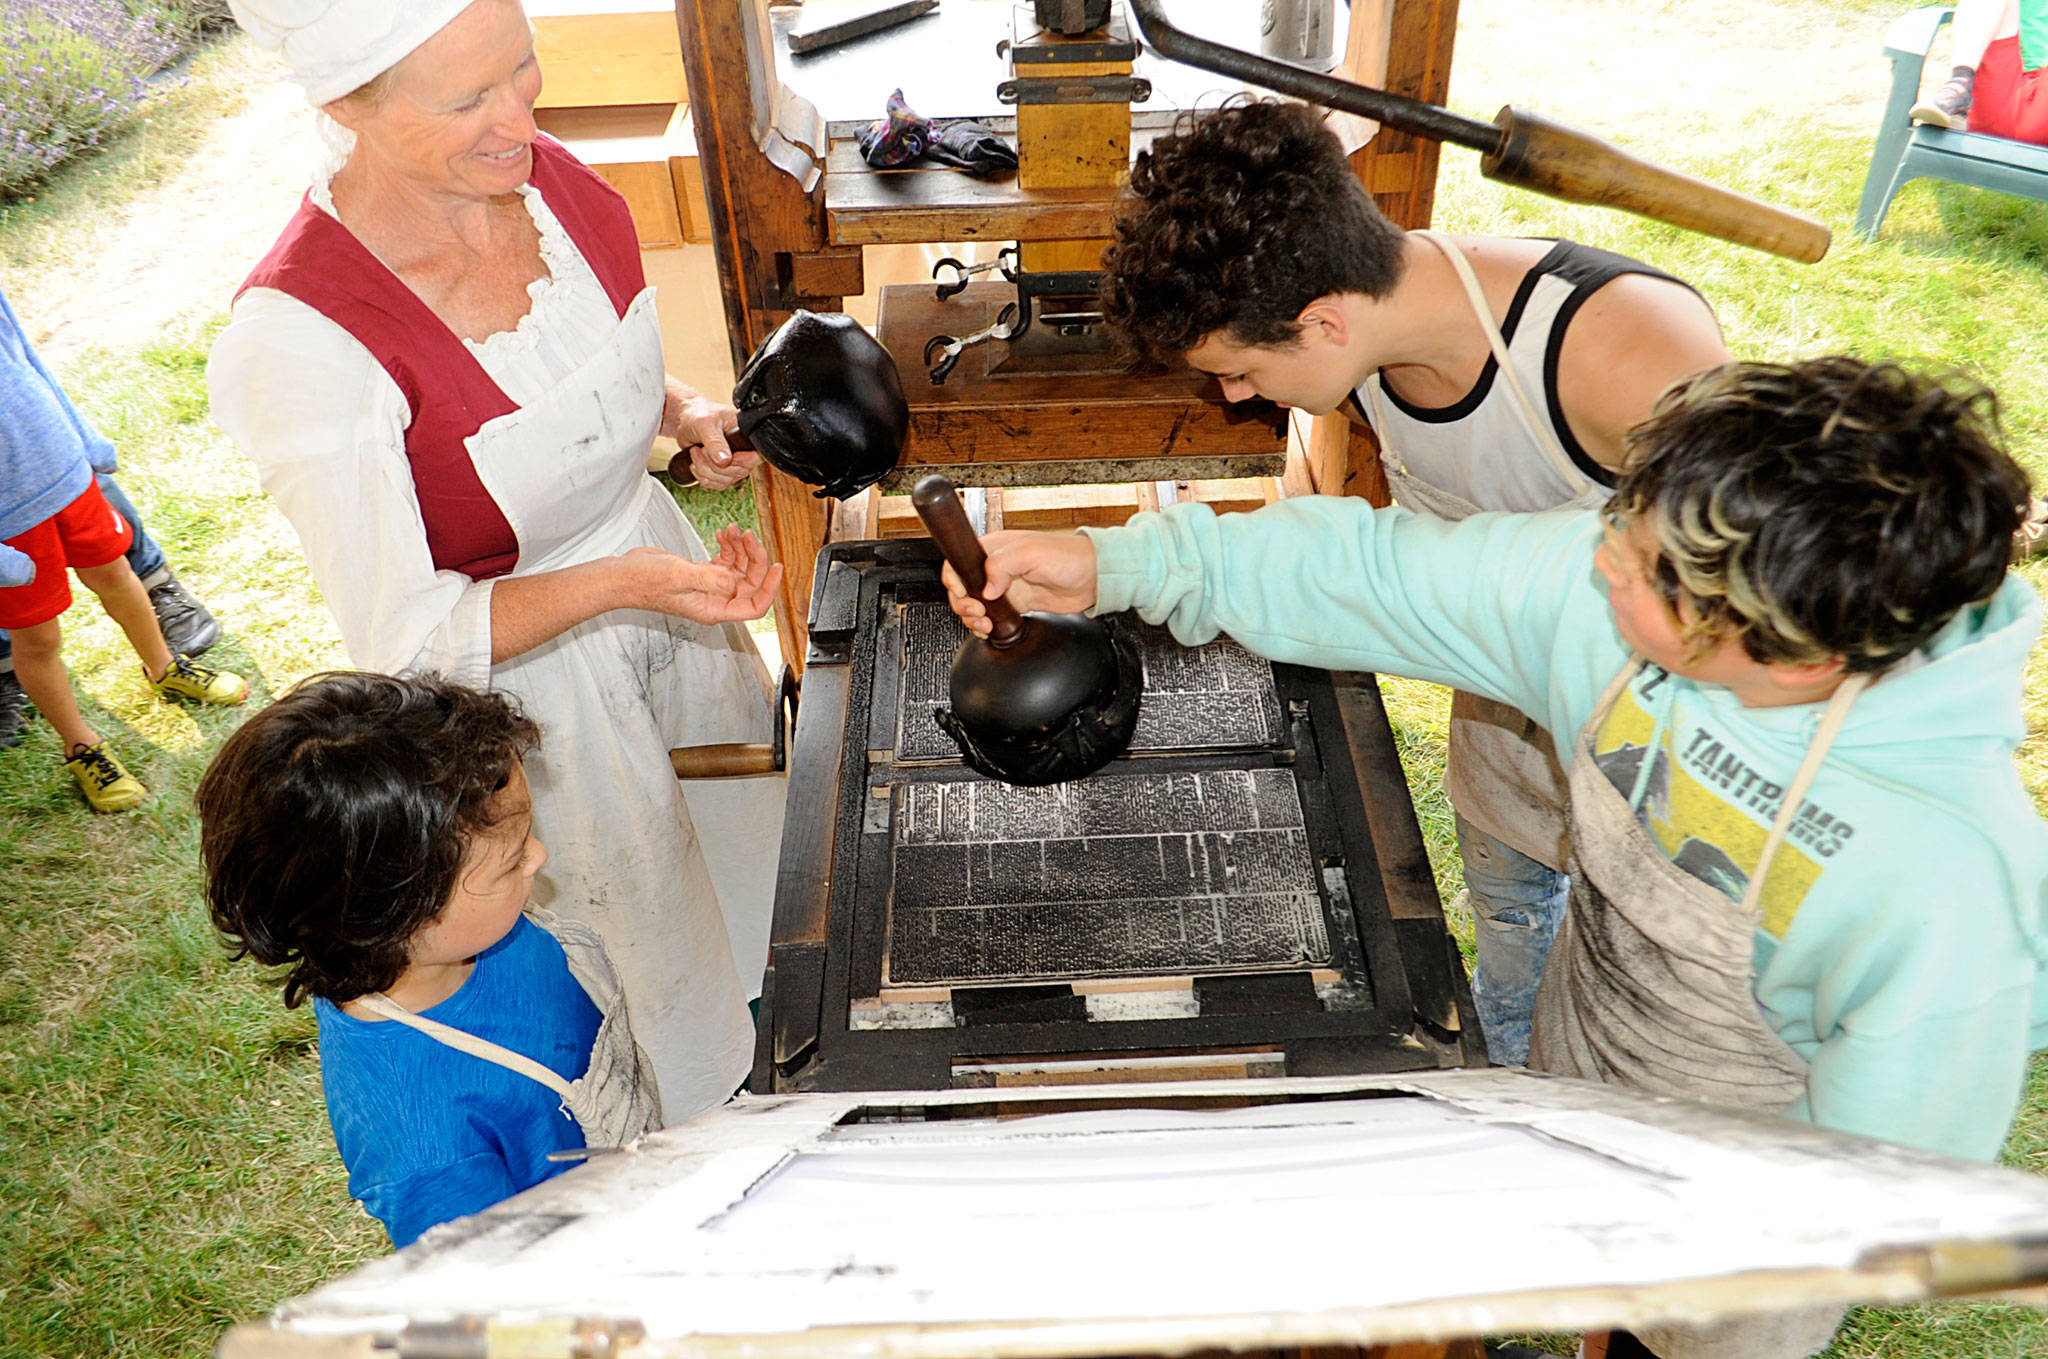 Nickie Allen of Utah shows brothers Rizzolo, 9, Canaan, 12, and Broden Texeira, 17 of Bremerton how her husband Gove’s replica of Isaiah Thomas’ printing press works. The Allens returned to the Northwest Colonial Festival for the first time since 2017 to share hands-on learning.